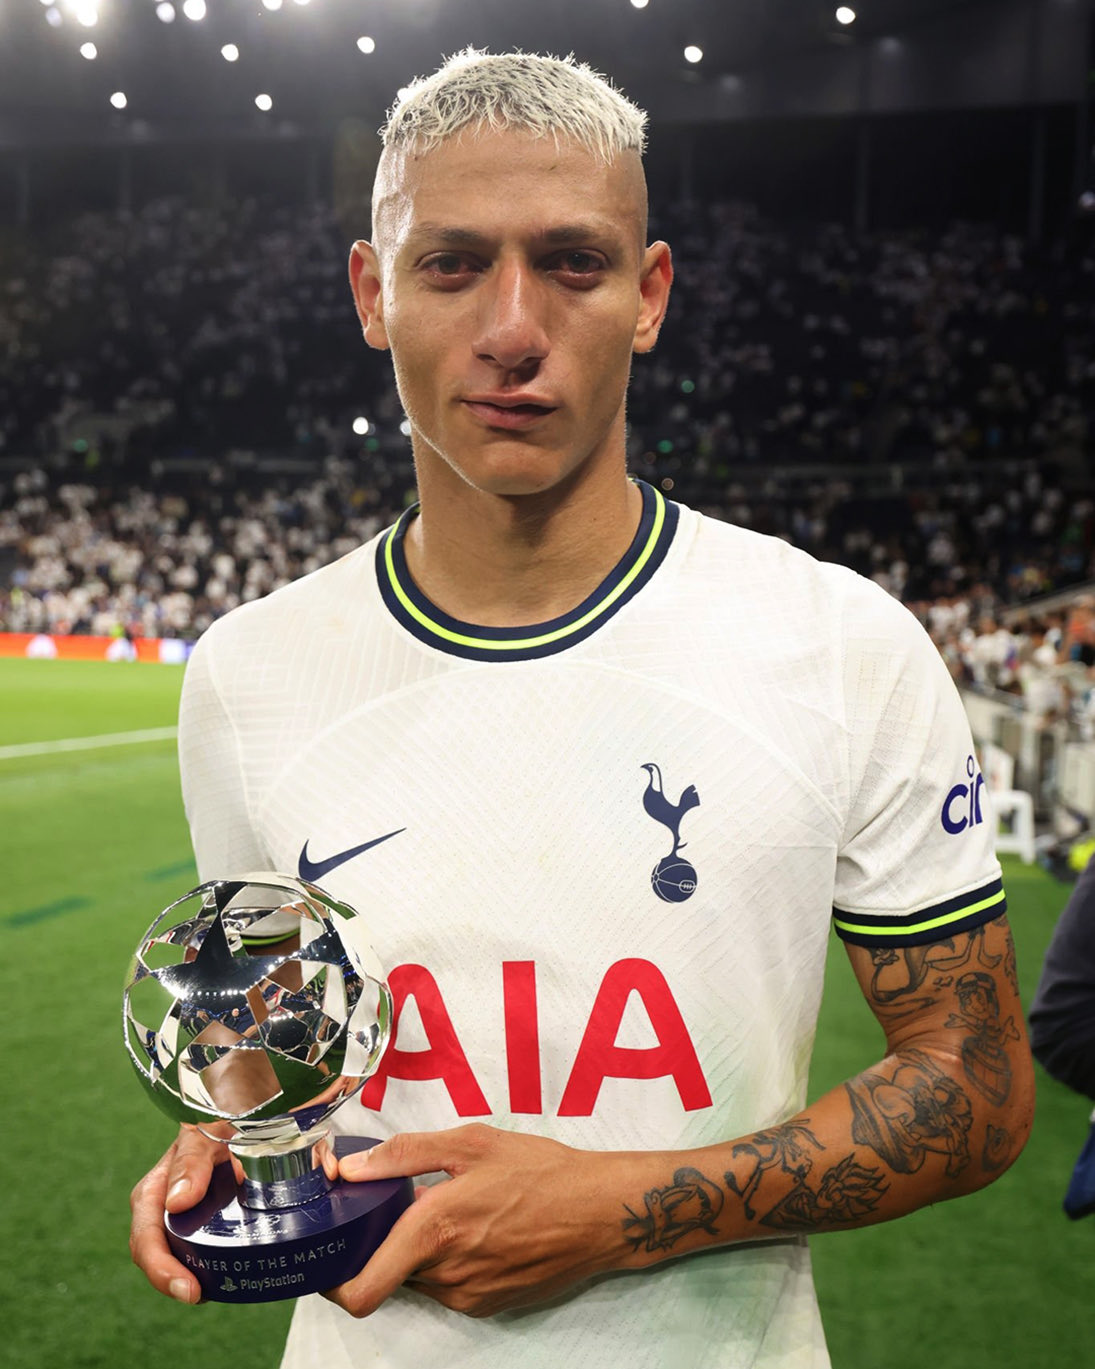 Richarlison tearfully smiles after accepting his Champions League Player of the Match award.